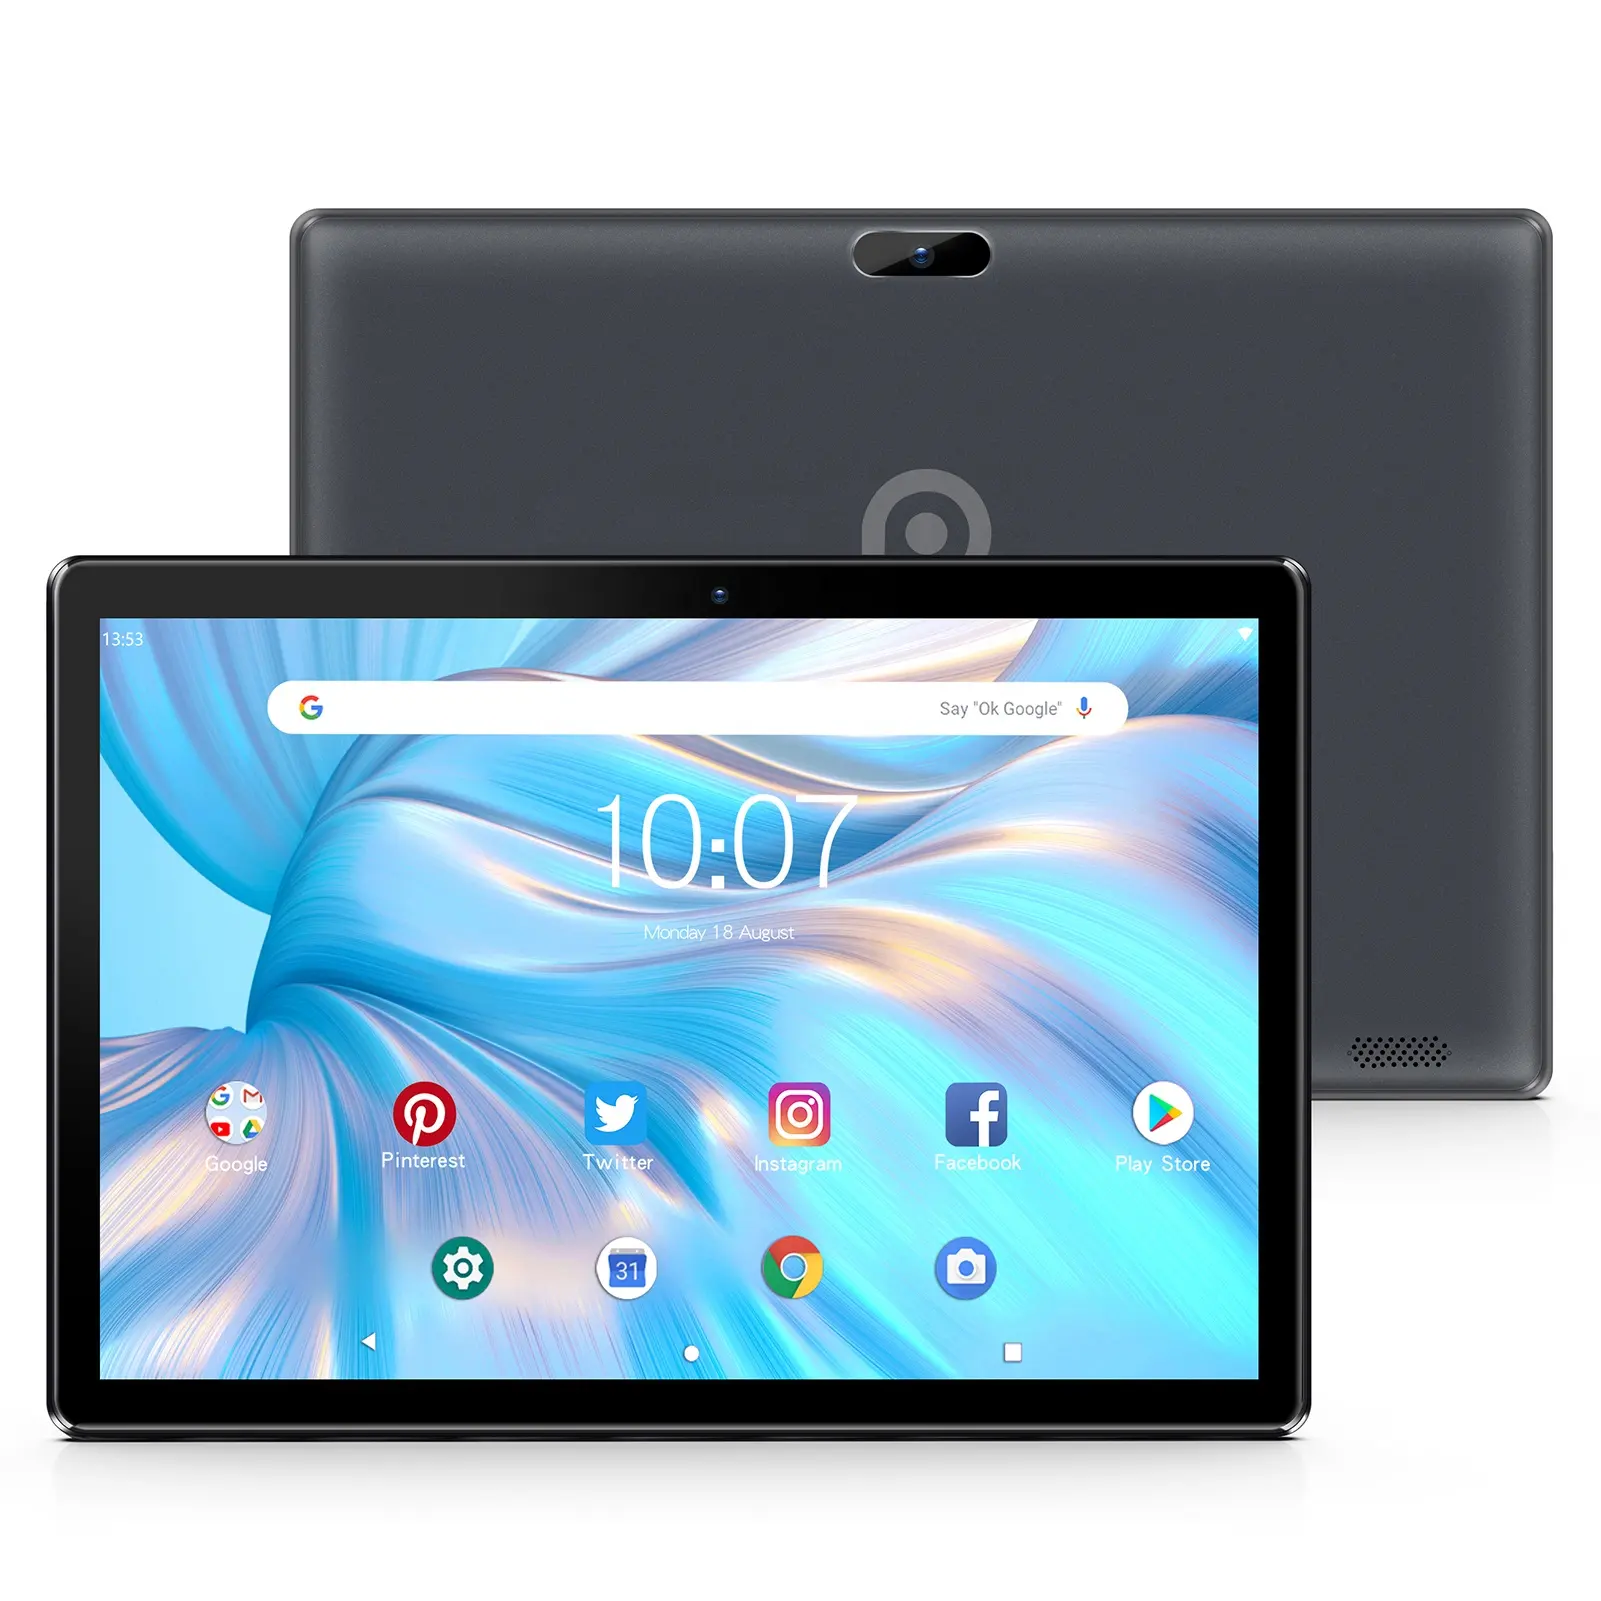 Pritom M10 3G telefonata Smart Tablet Tablet PC Android da 10.1 pollici Android 10 2GB + 32GB versione globale con tablet pc Google Play